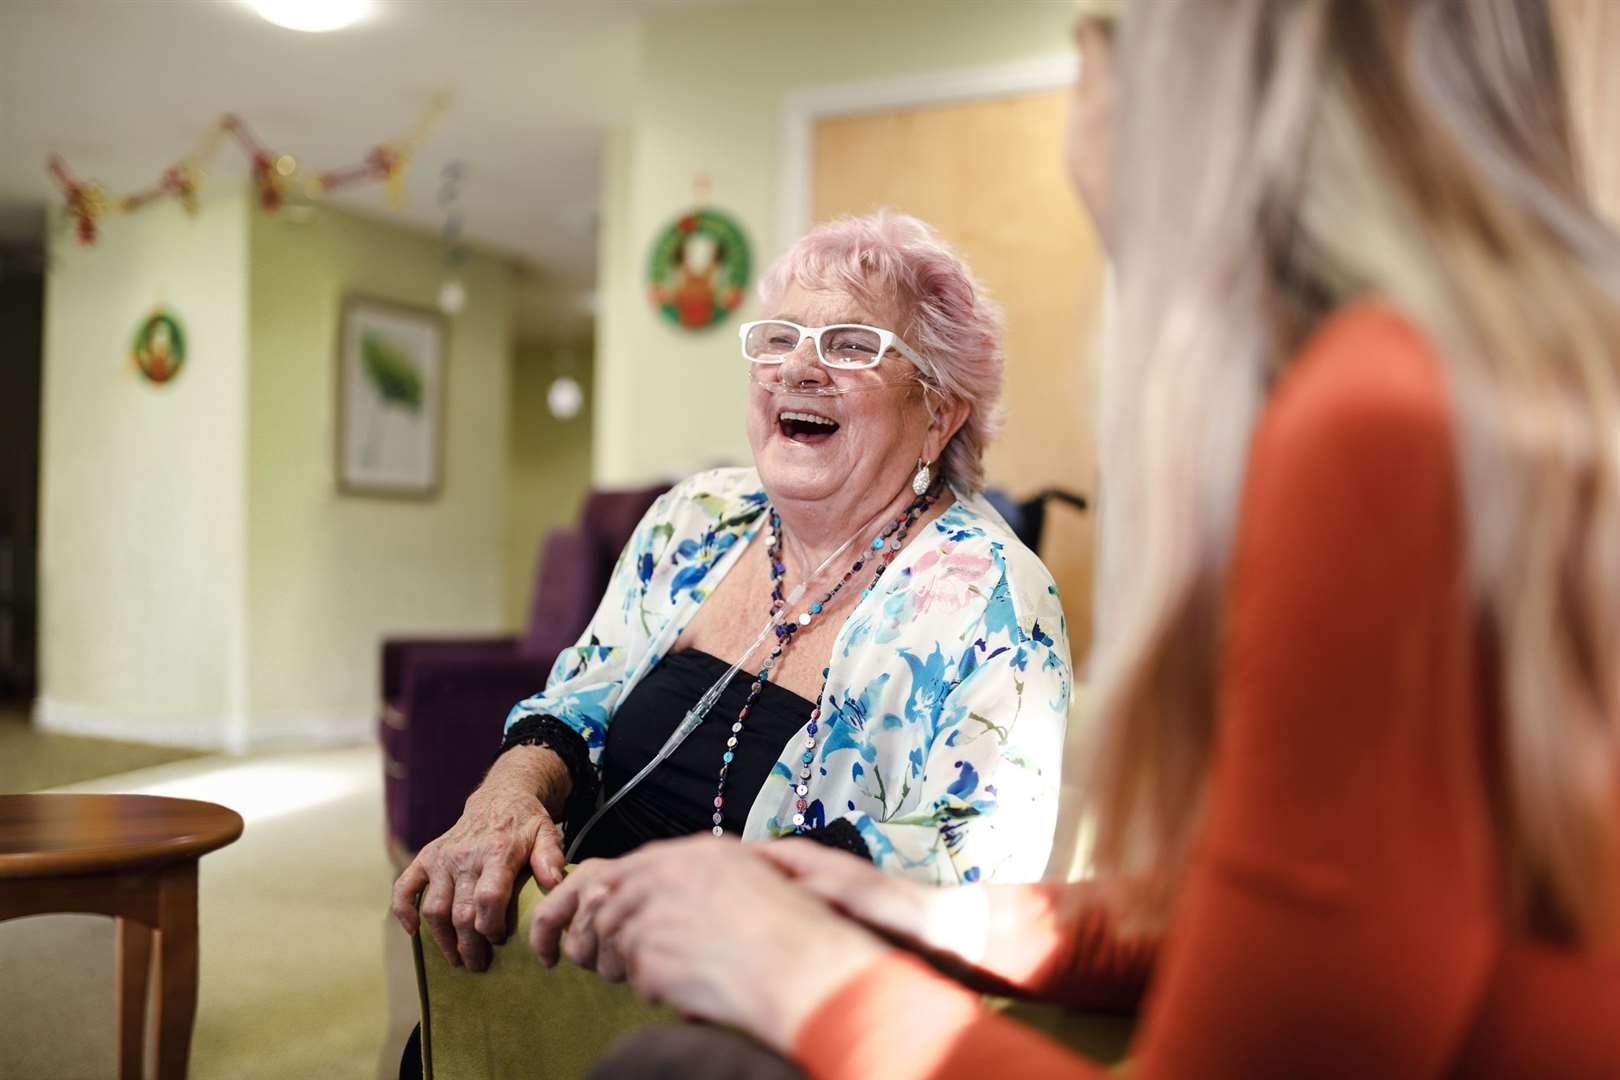 ALL SMILES... Care home residents can have up to five regular visitors